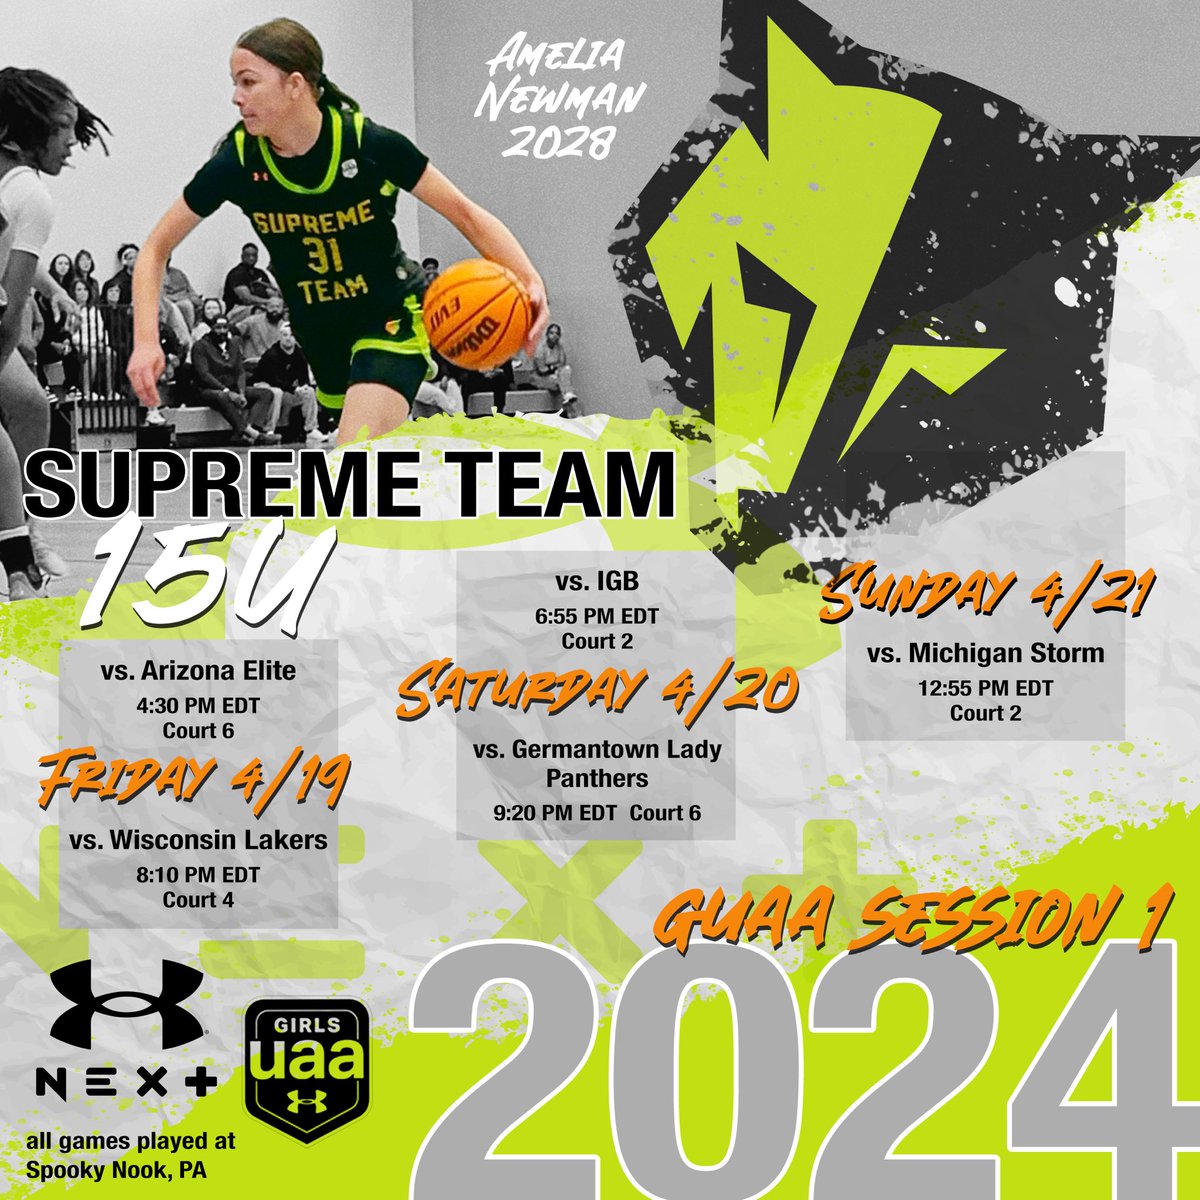 Next Stop ➡️ Spooky Nook for the @UANextGHoops Session #1. Excited to compete this weekend with my teammates! 🔰x🐺 @SupremeTeamGbb x @dougregister5 @FBCMotton